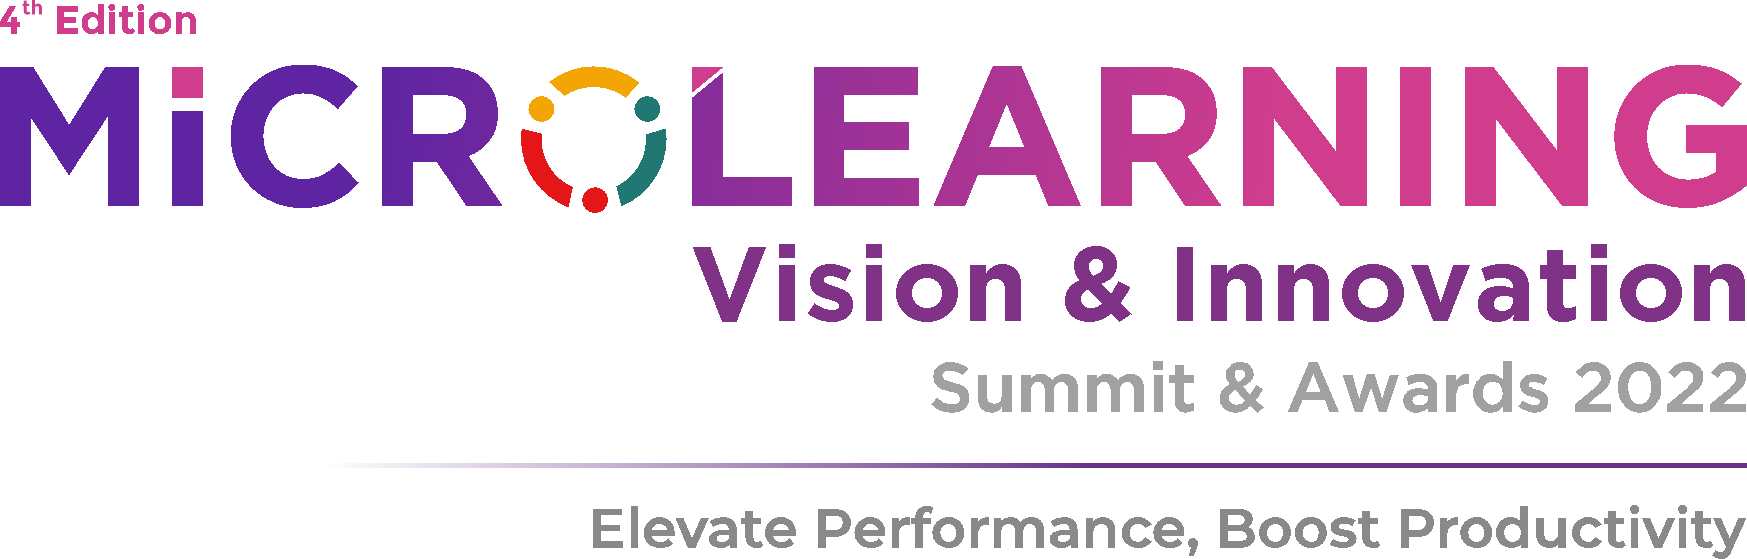 4th Edition Microlearning Vision And Innovation Summit & Awards 2022